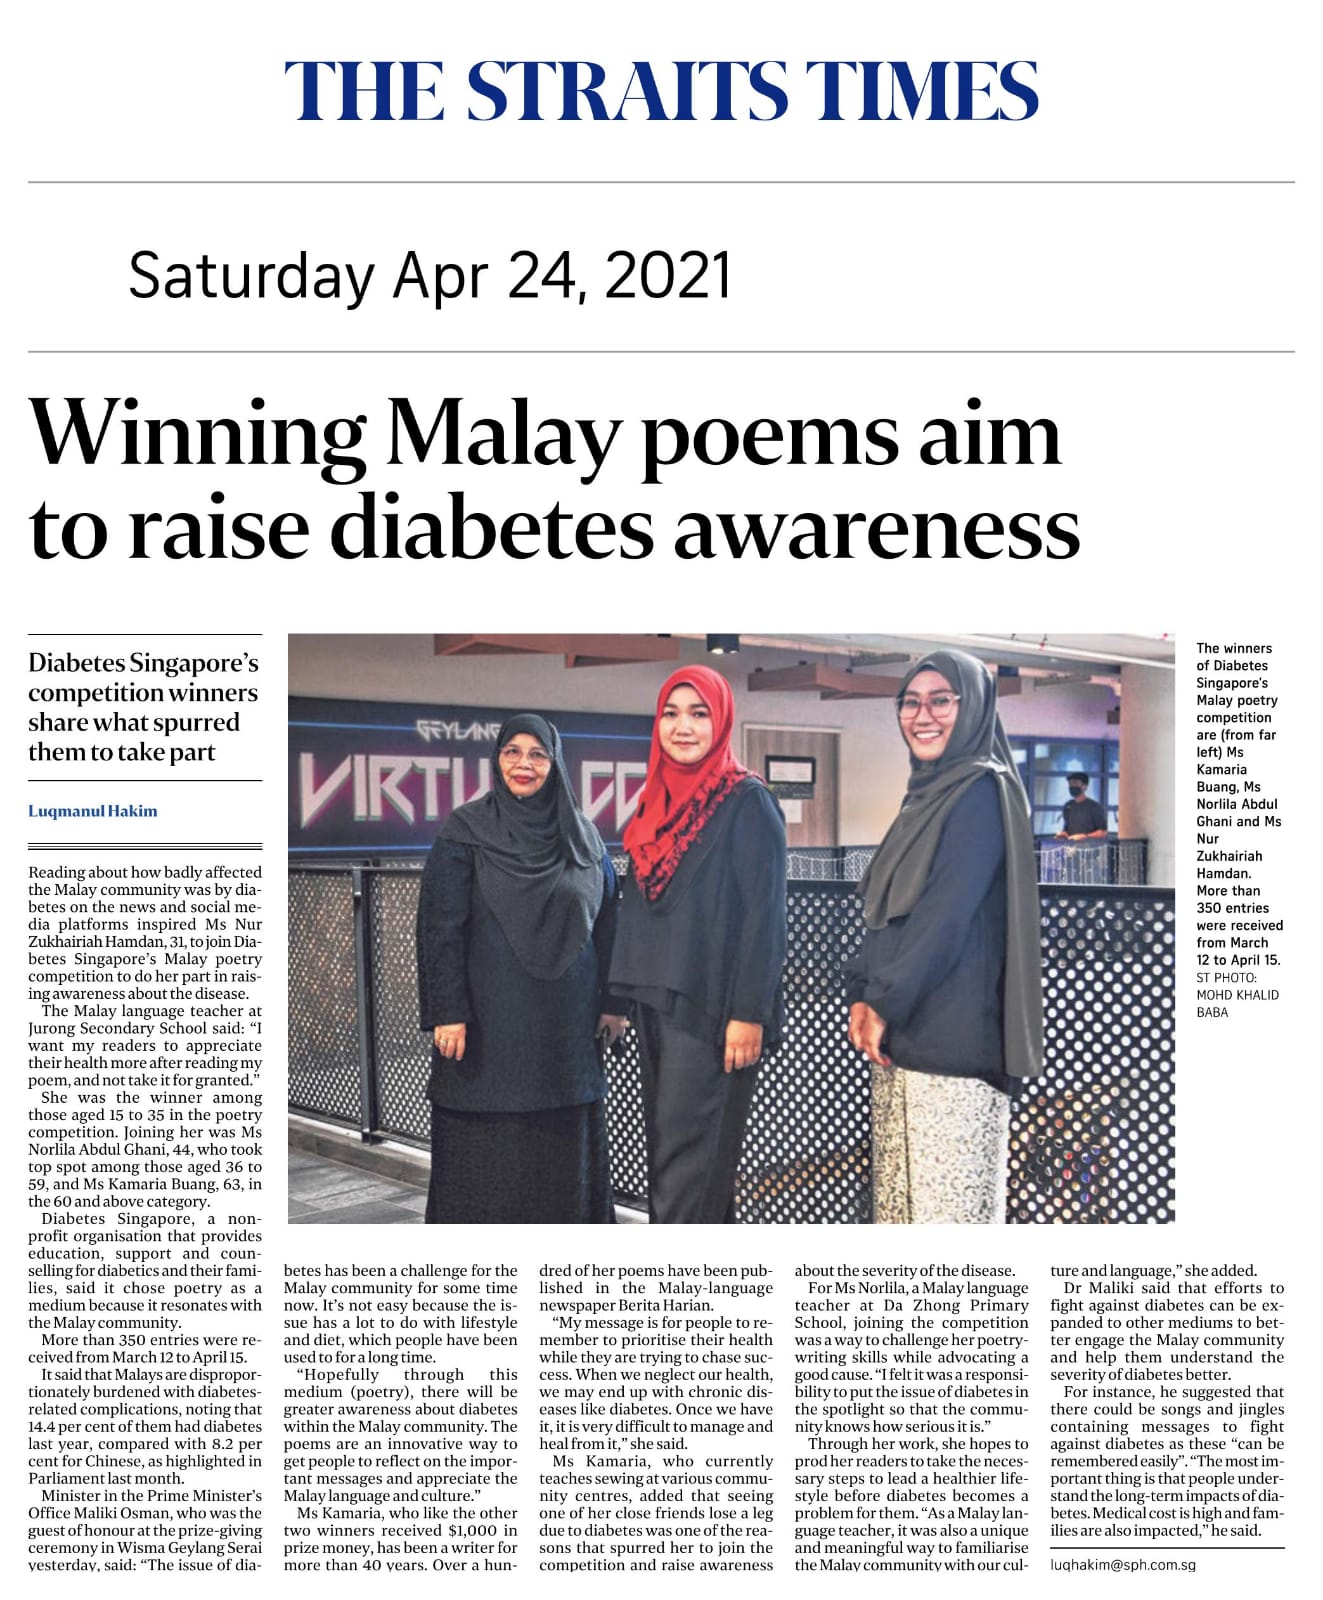 Winning Malay poems aim to raise diabetes awareness - Published in The Straits Times Apr 24, 2021